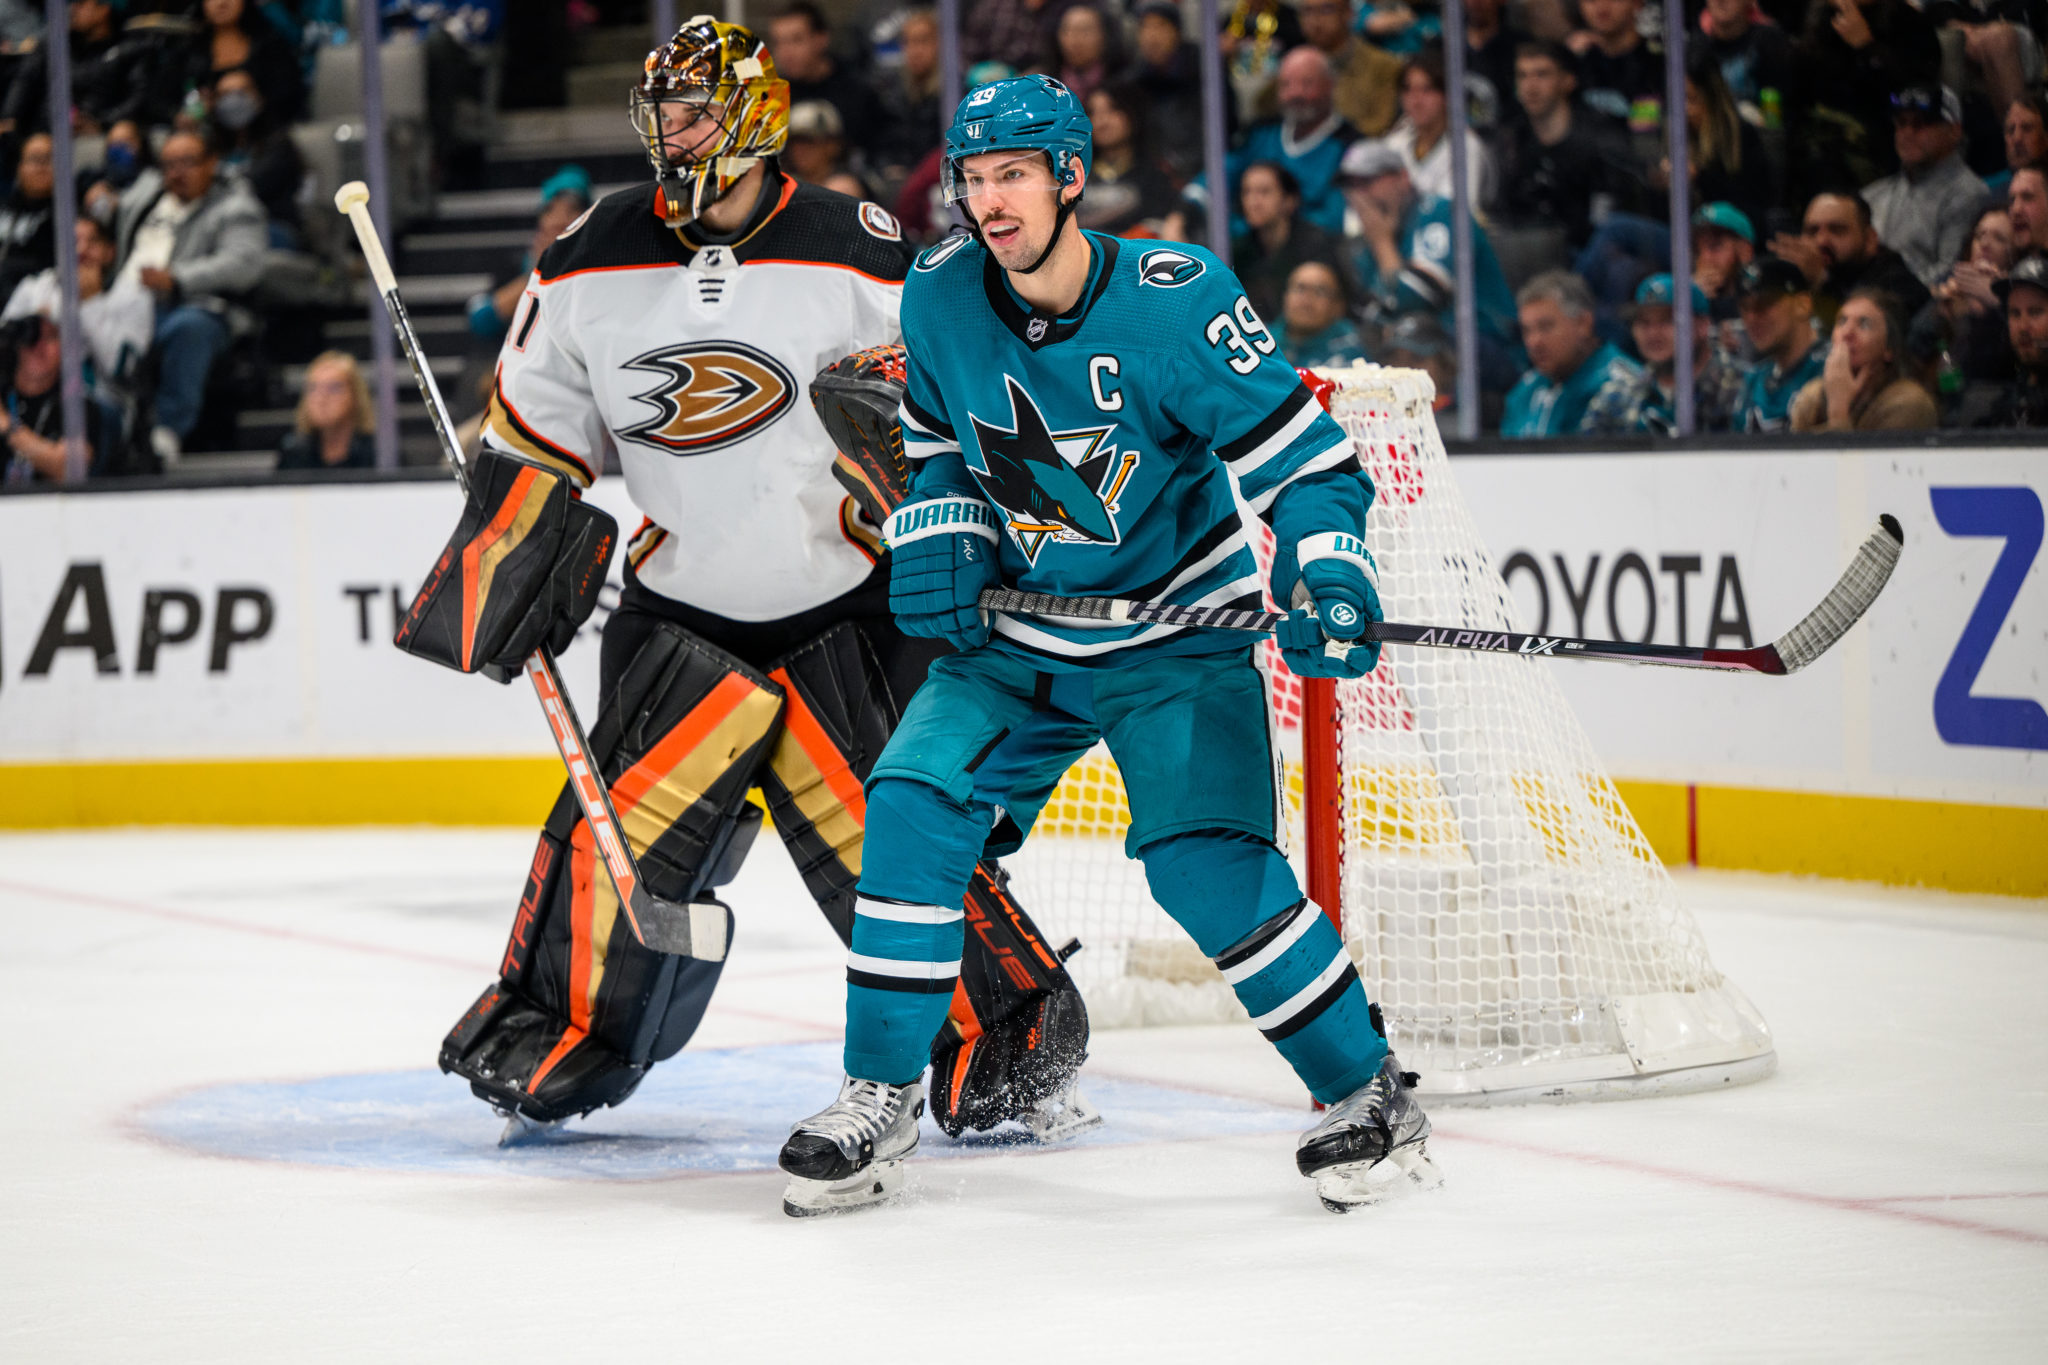 Logan Couture Ruled Out for Thursday; still Week-to-Week - The Hockey News  San Jose Sharks News, Analysis and More